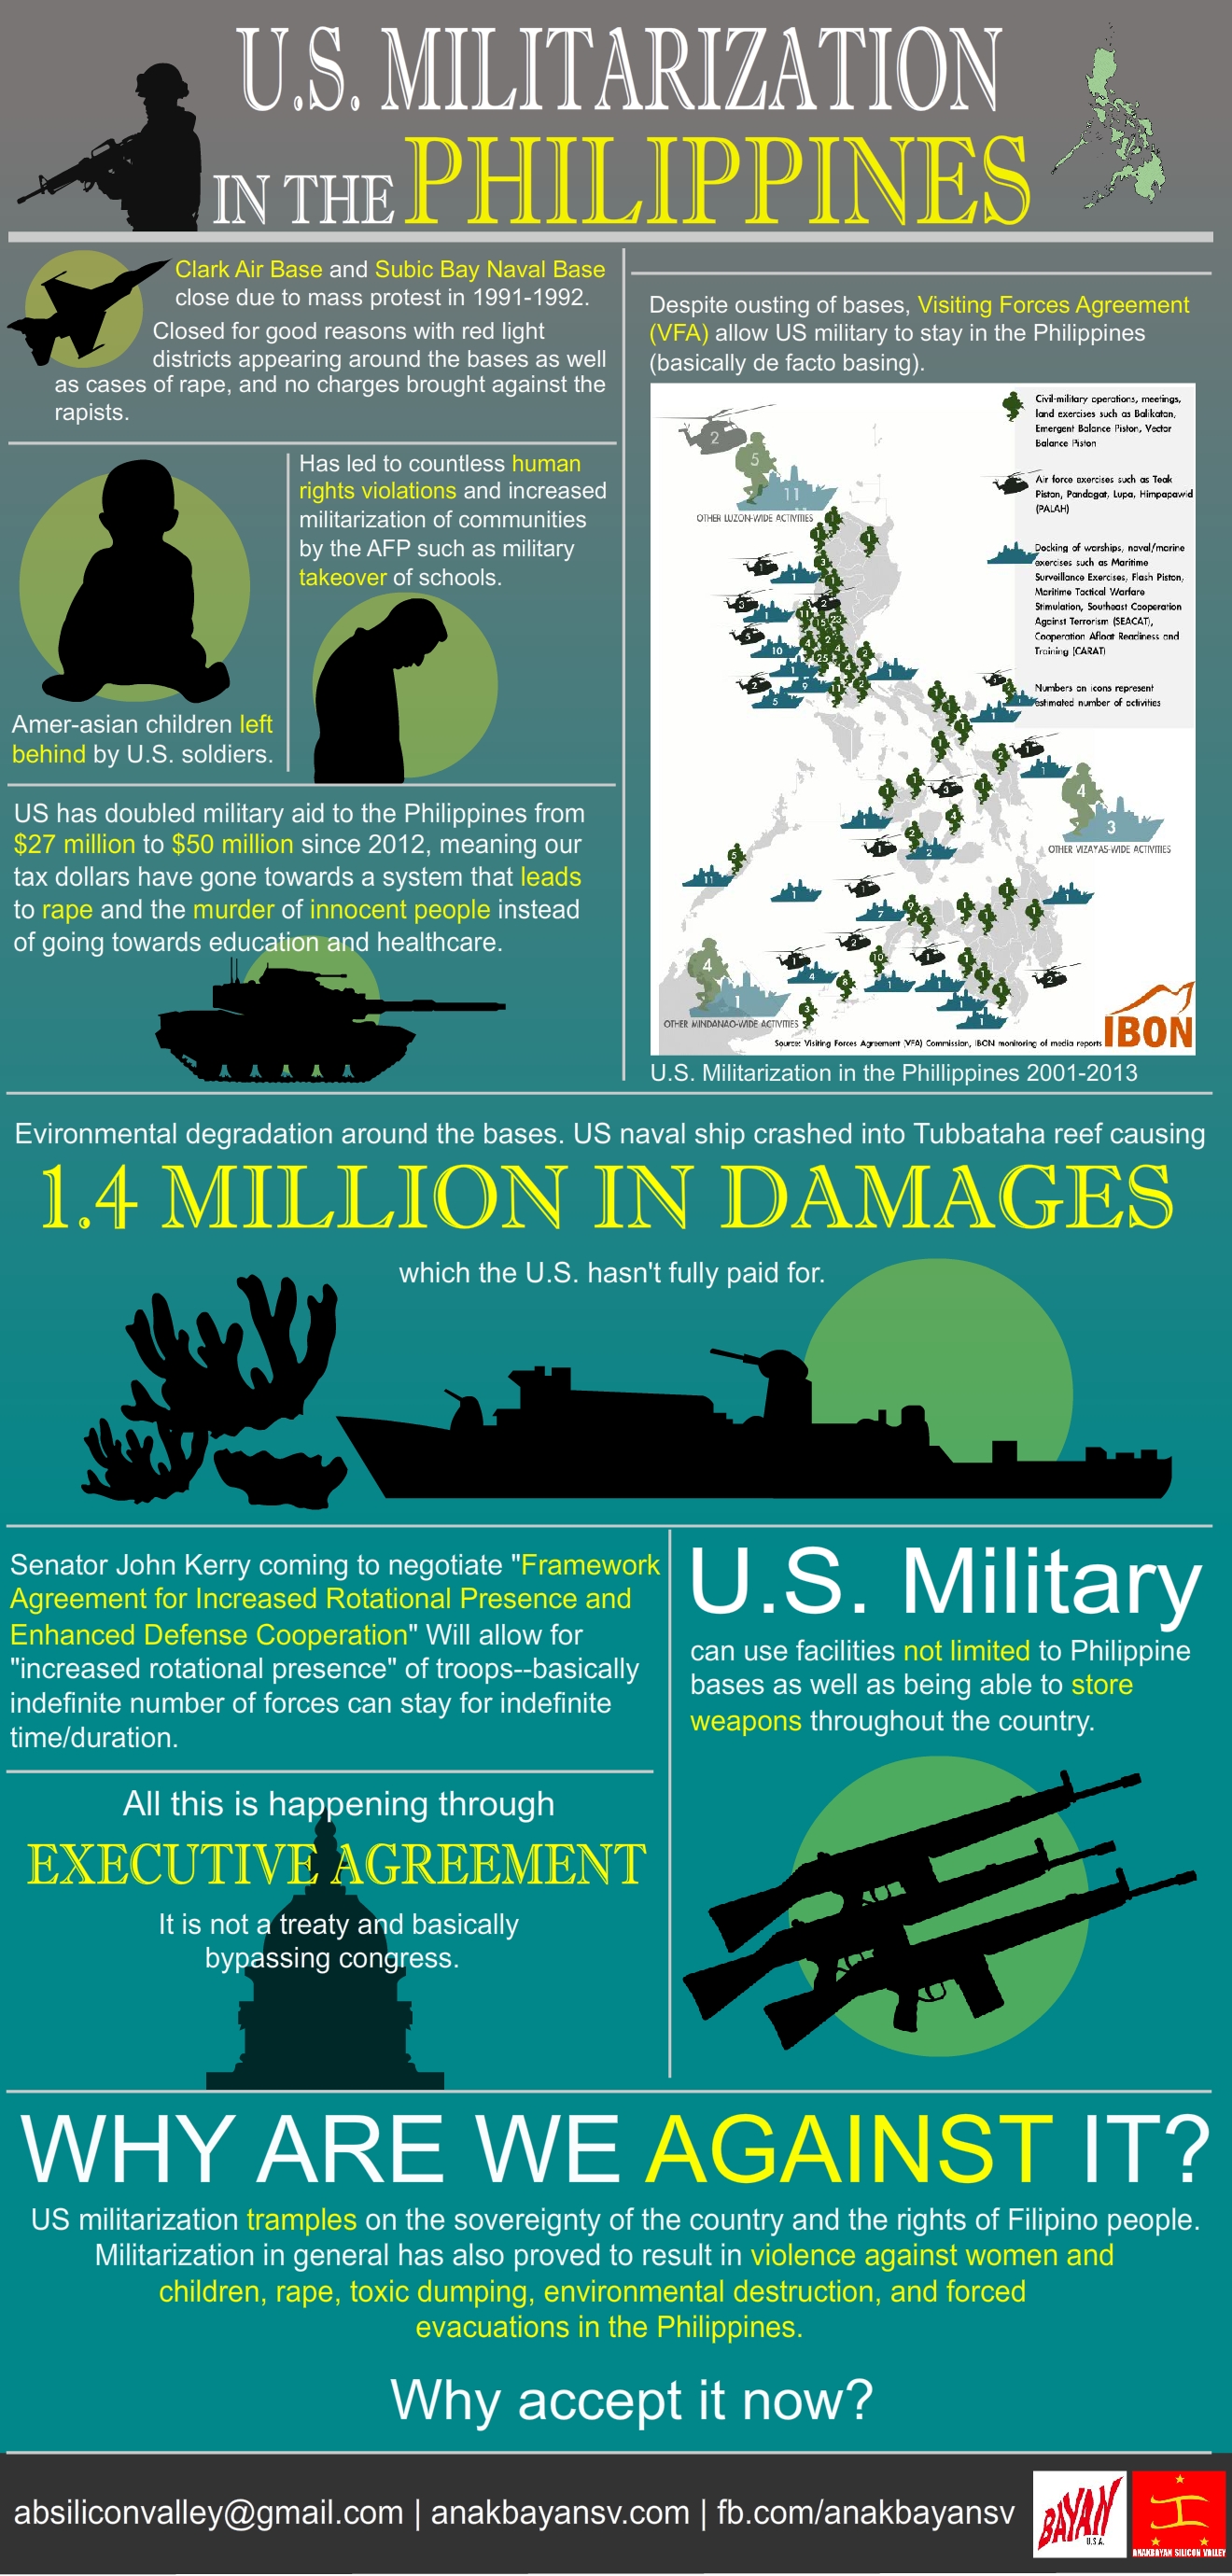 ABSV Militarization Infographic final